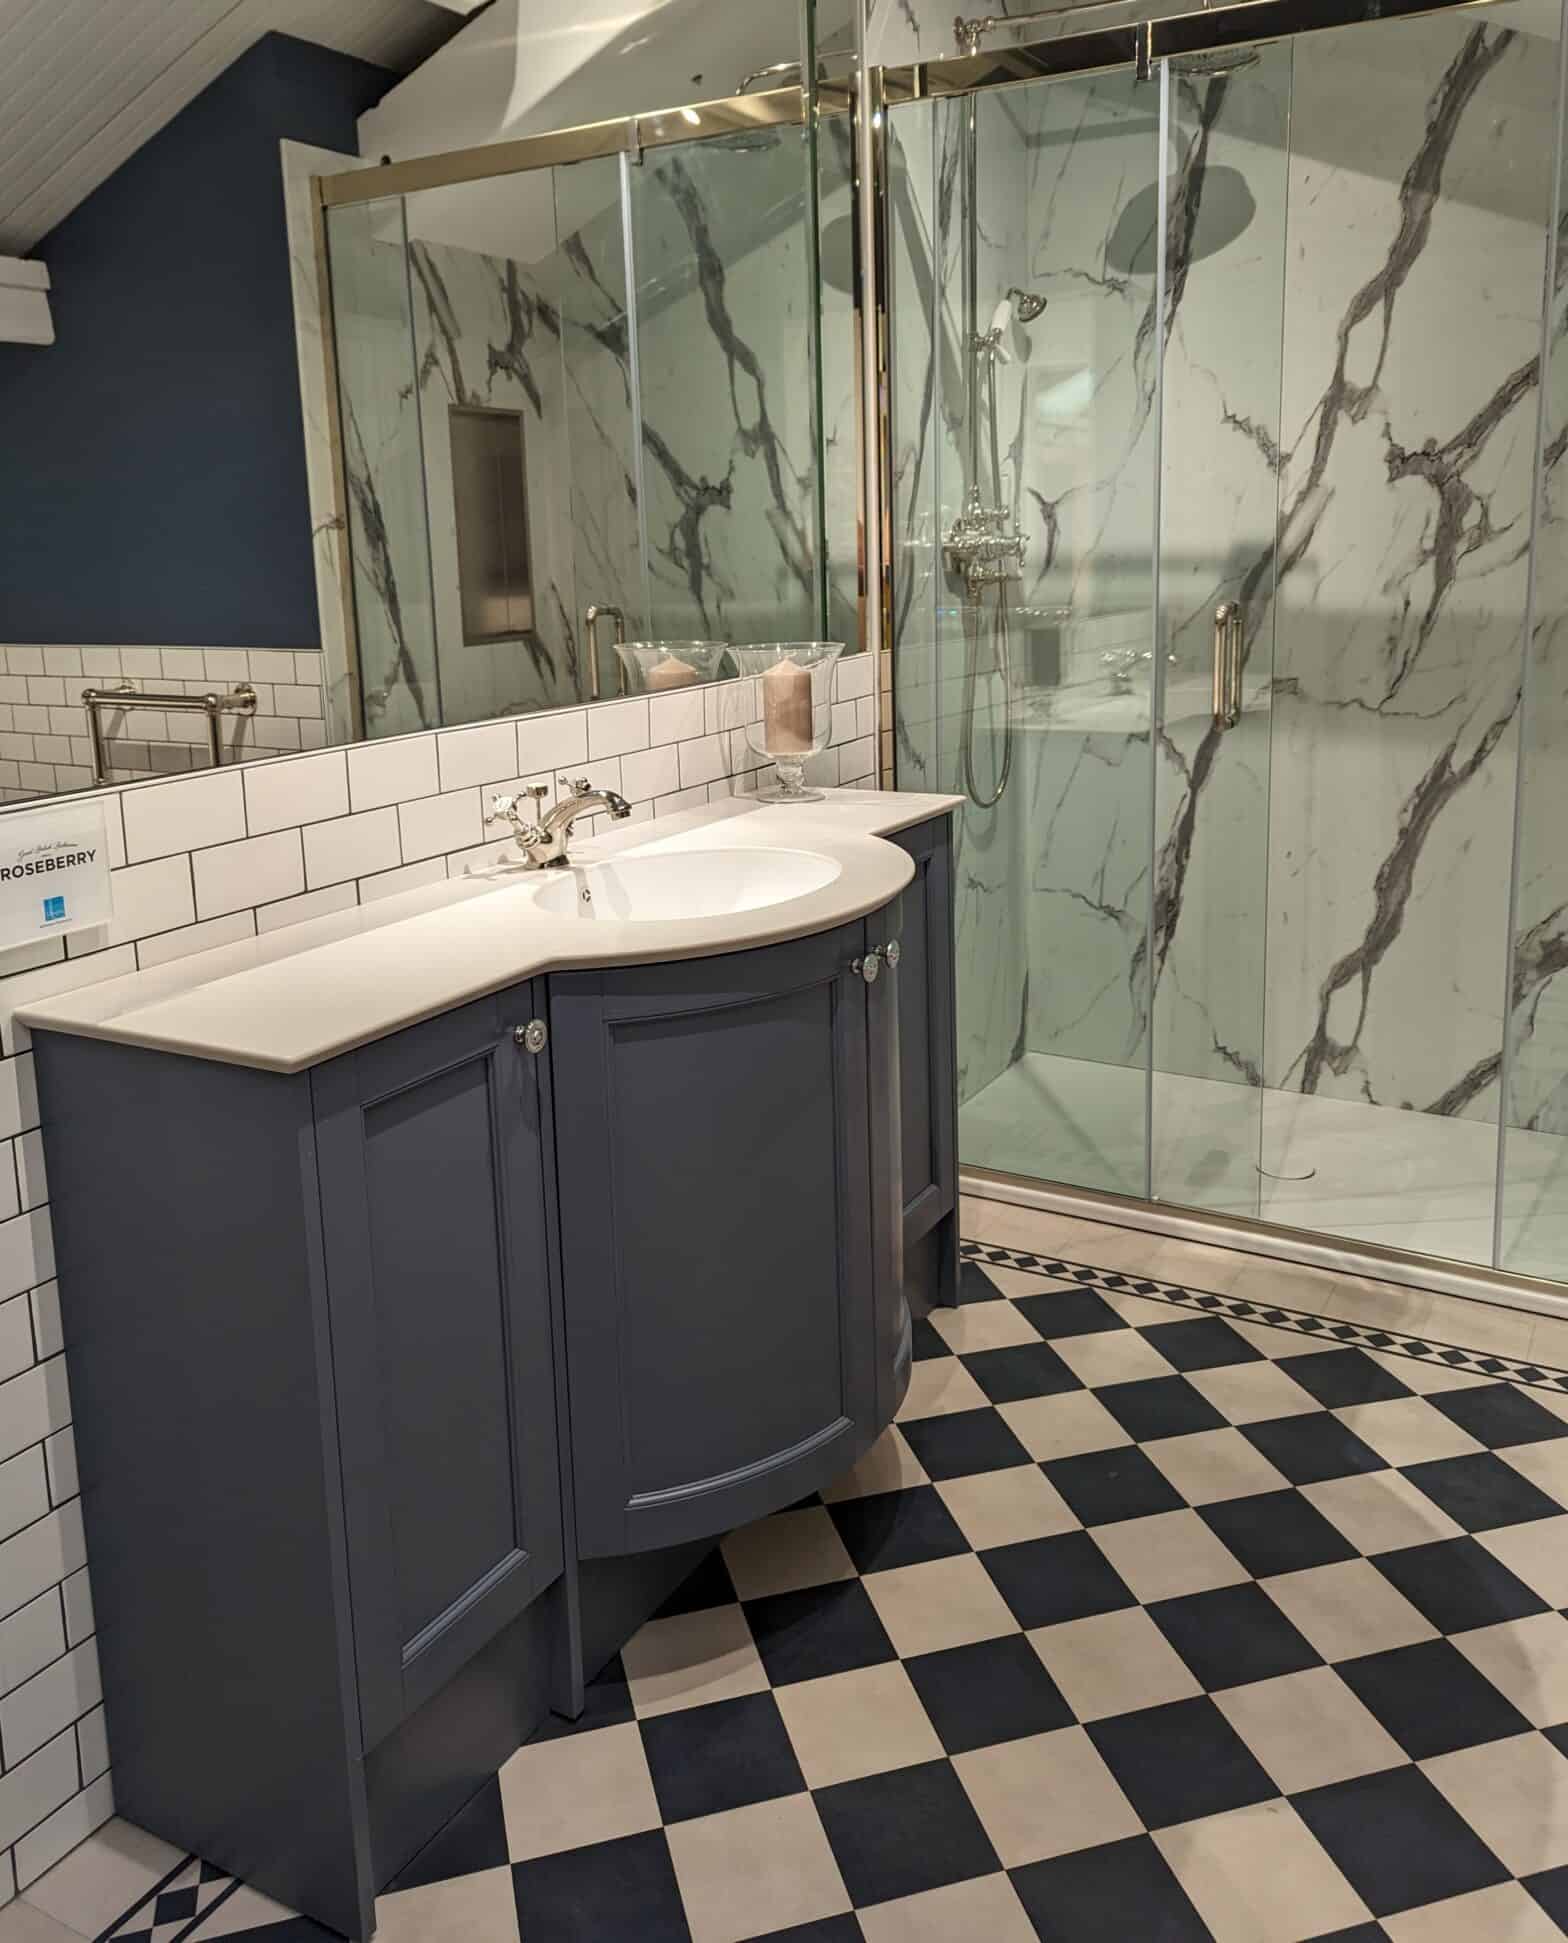 A photo of a traditional style bathroom with large walk in shower with sliding door and marble effect wall panels. A floor standing vanity unit sits along a wall tiled in white subway tiles.